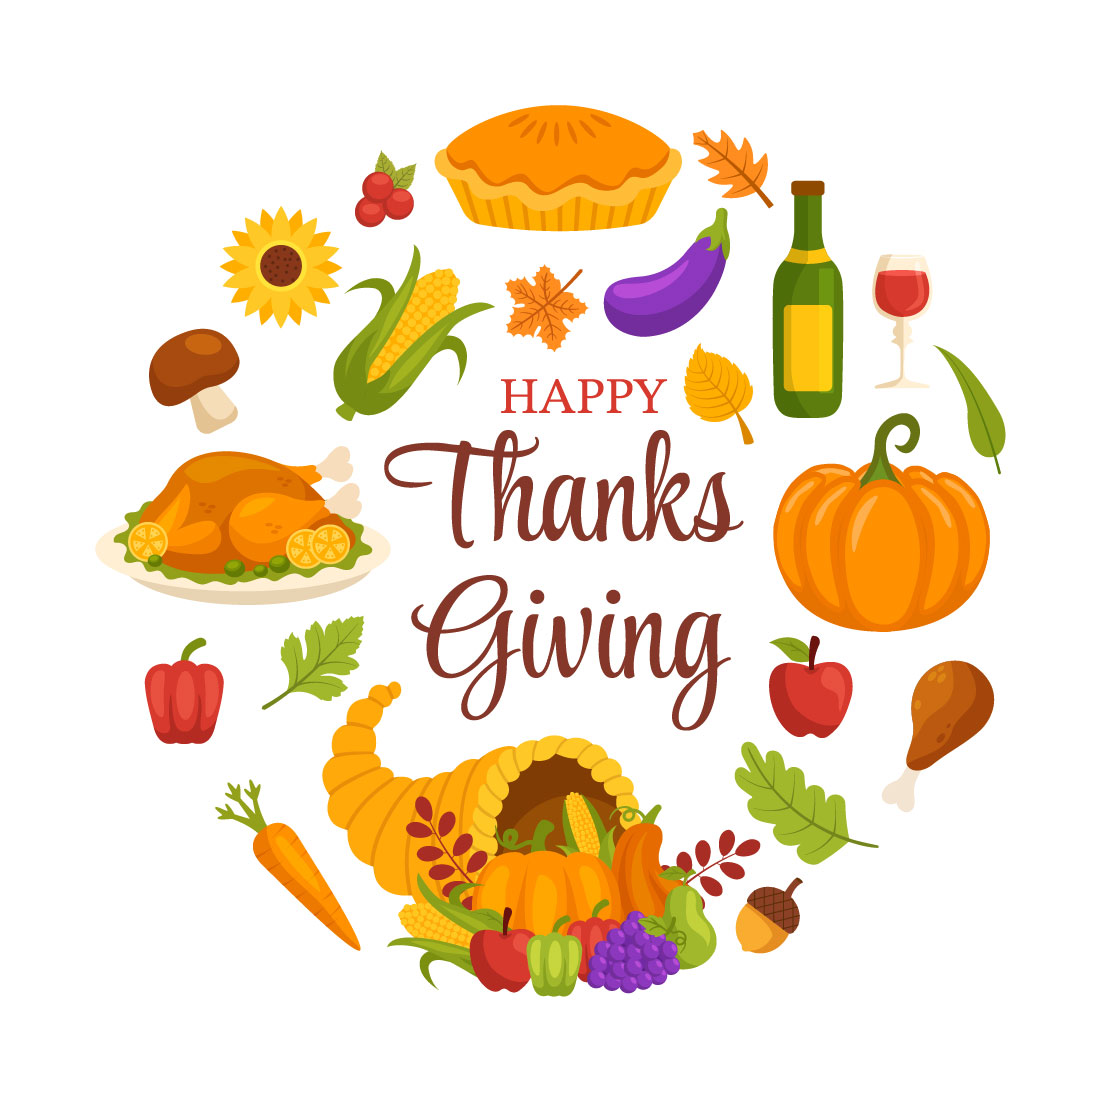 30 Happy Thanksgiving Day Illustration cover image.